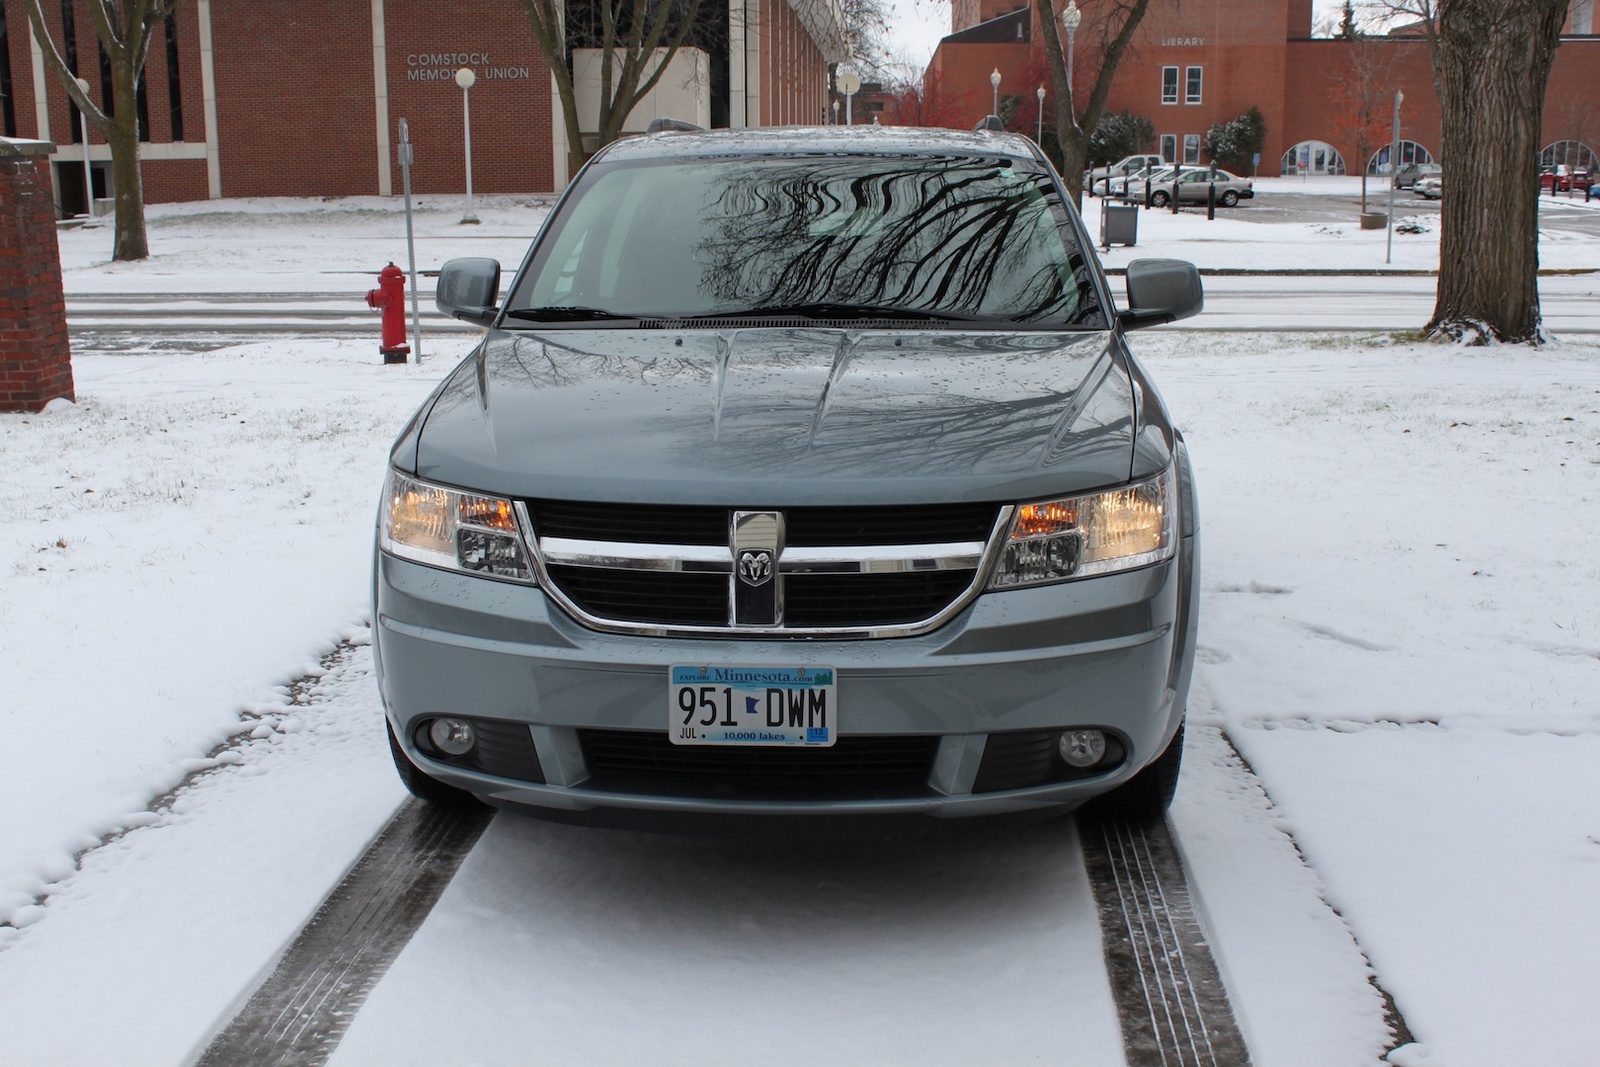 images of 2010 dodge journey sxt awd pictures picture of wallpaper